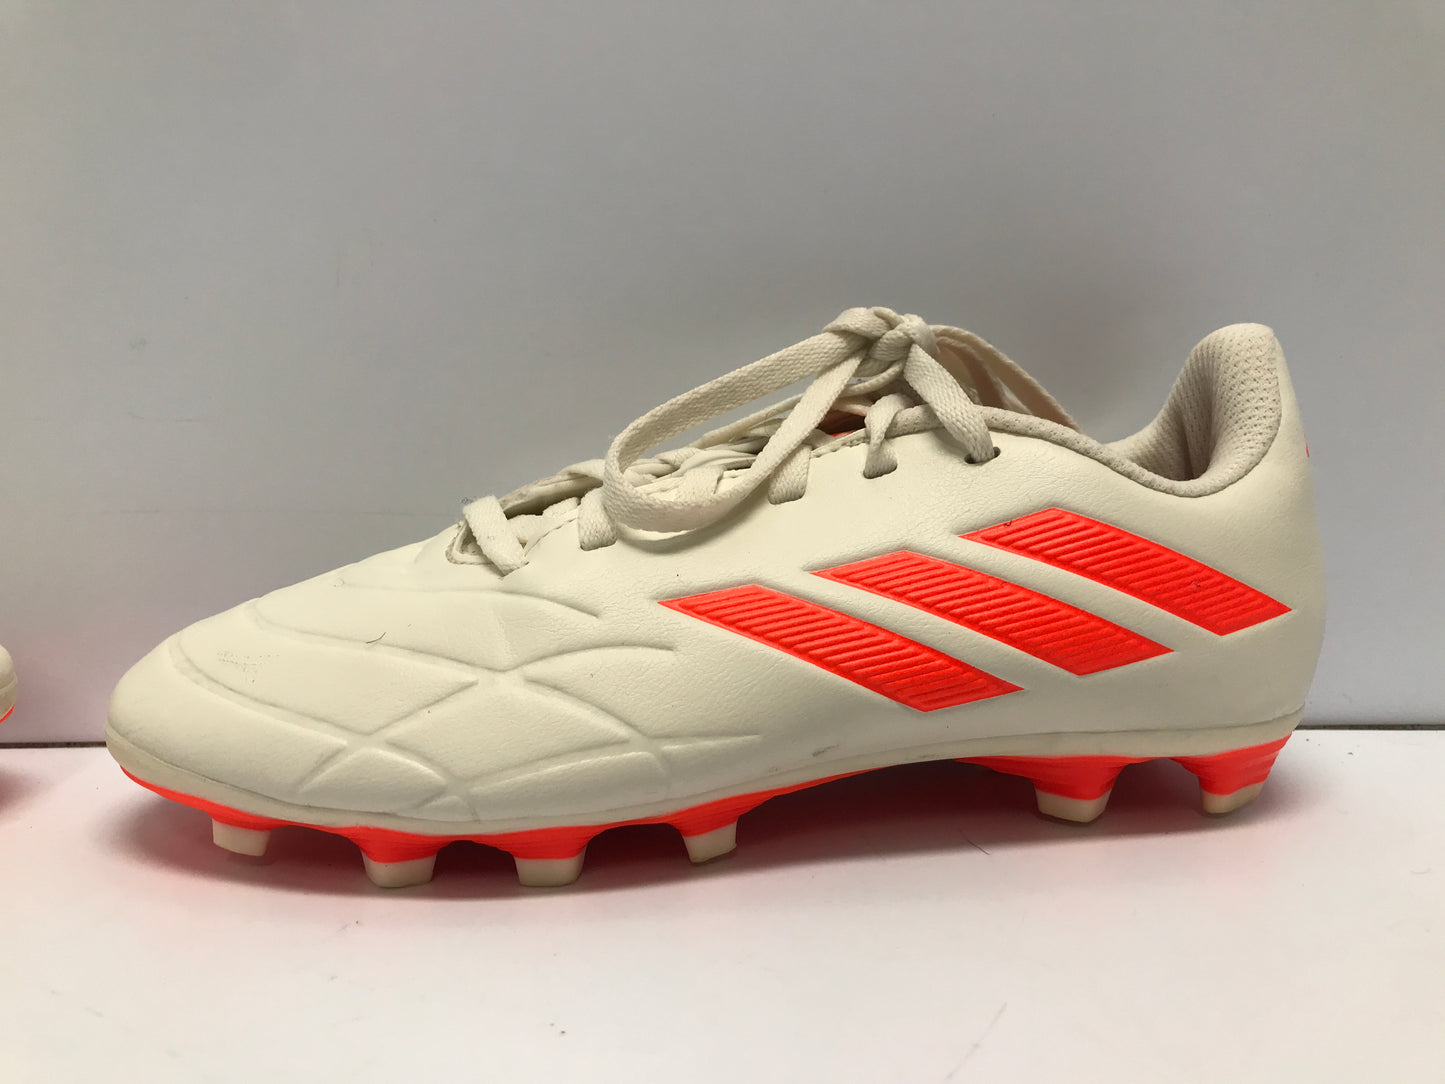 Soccer Shoes Cleats Child Size 2 Adidas Copa White Tangerine Like New